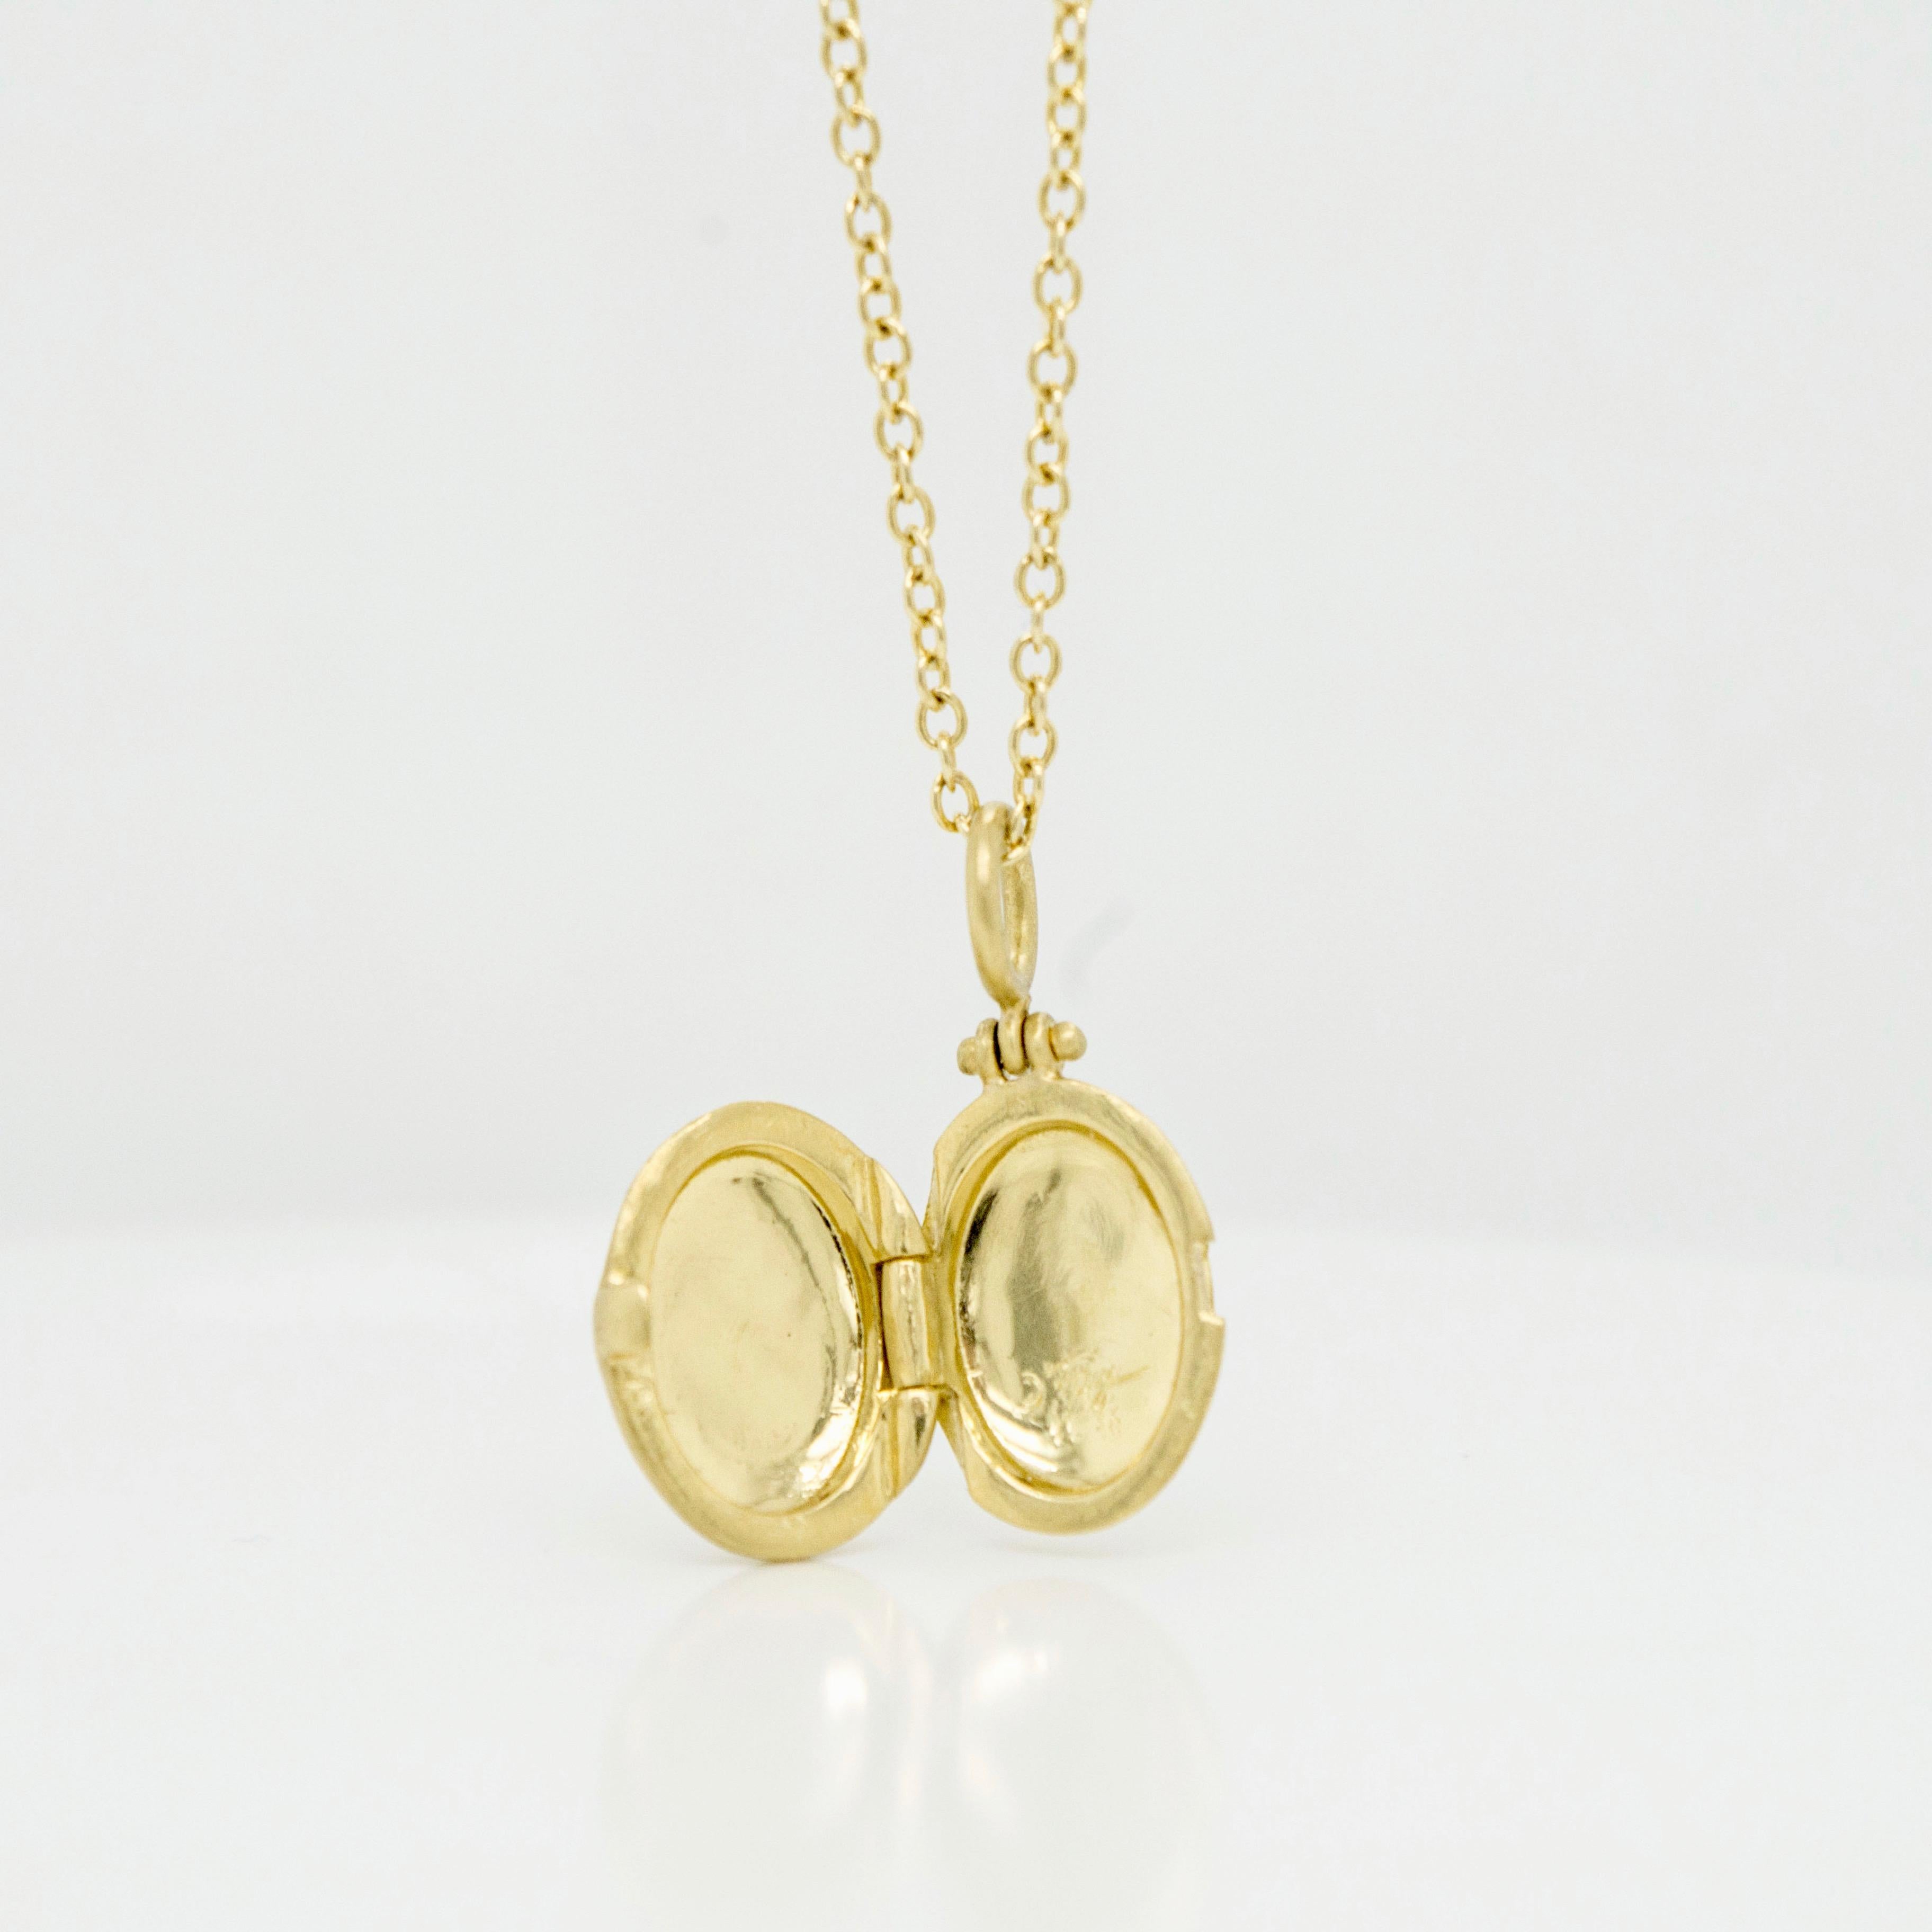 Faye Kim's 18 Karat Gold Small Oval Locket combines substance with style. Finely handcrafted and matte-finished, this locket can be personalized with an engraving or with gemstones, and layered with other necklaces or worn alone.

Locket .72